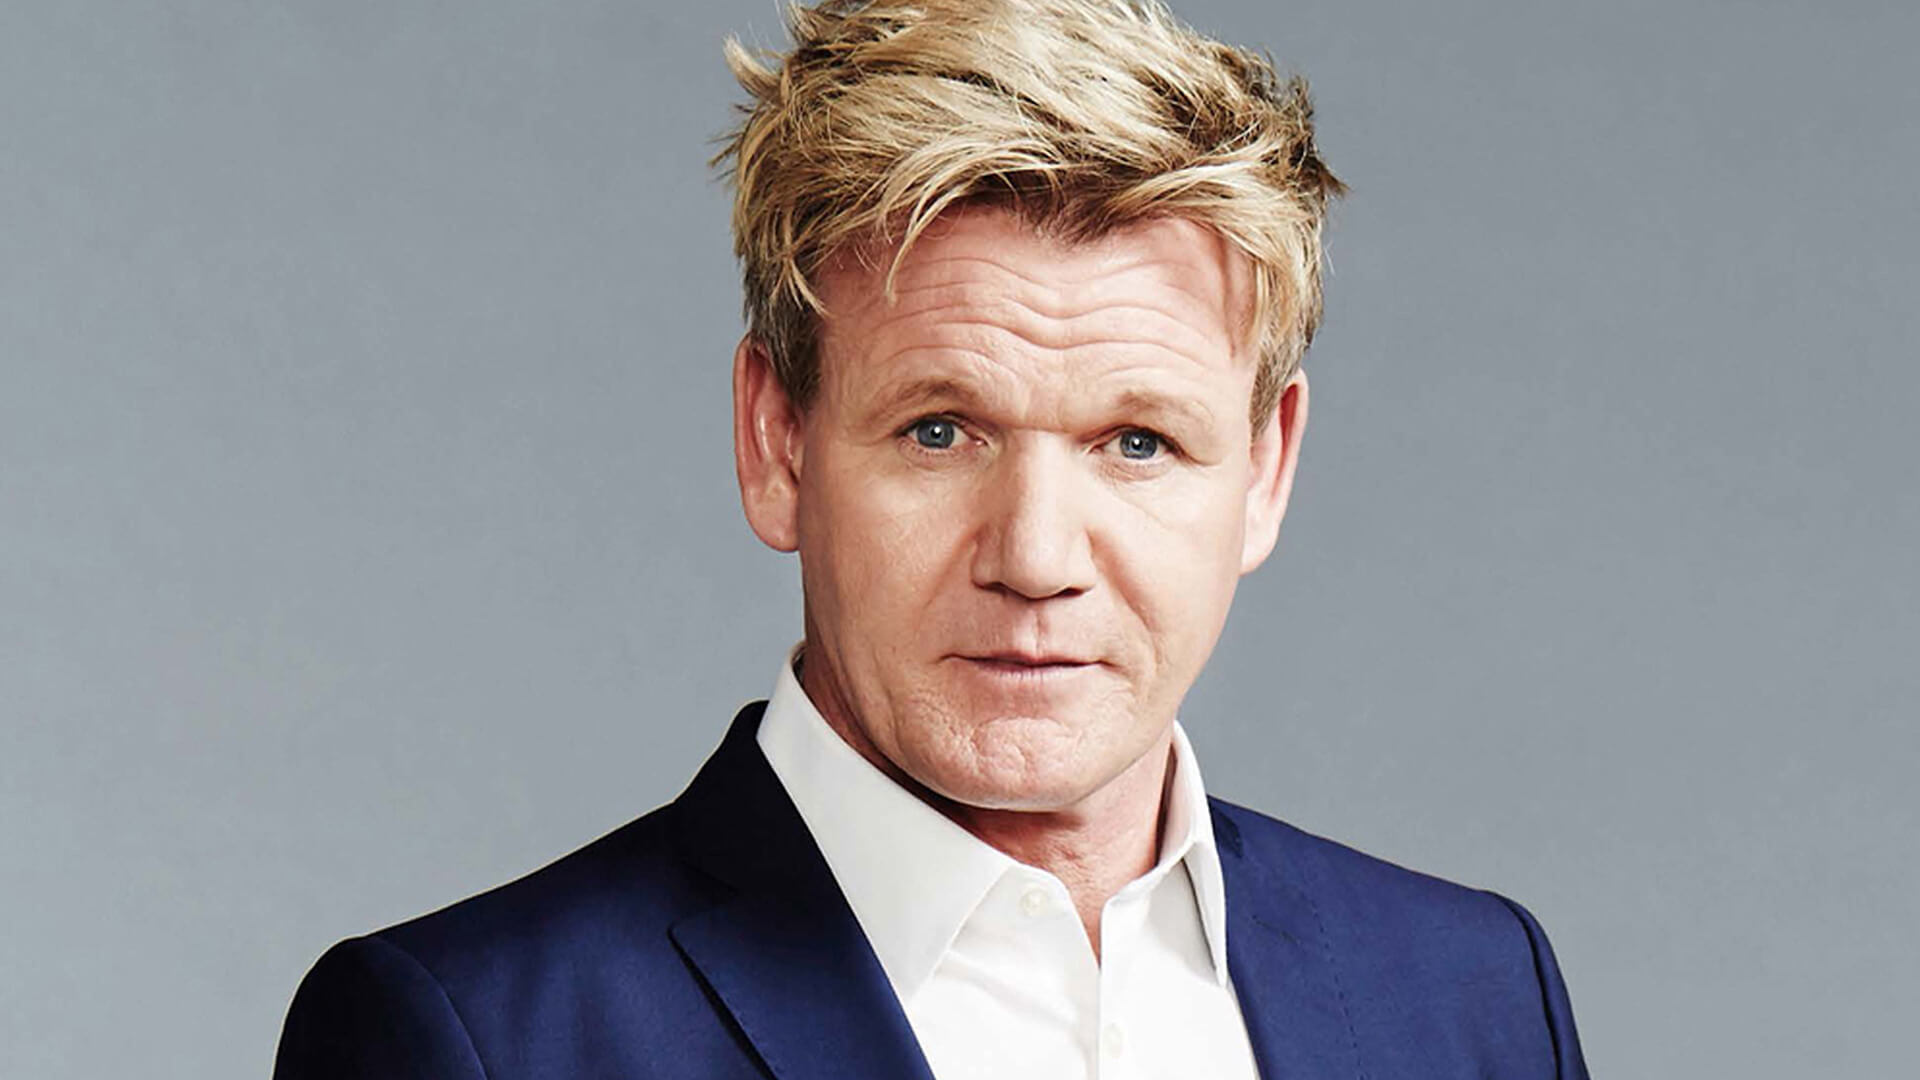 Gordon Ramsay: Was inducted into the Culinary Hall of Fame in January 2013. 1920x1080 Full HD Wallpaper.